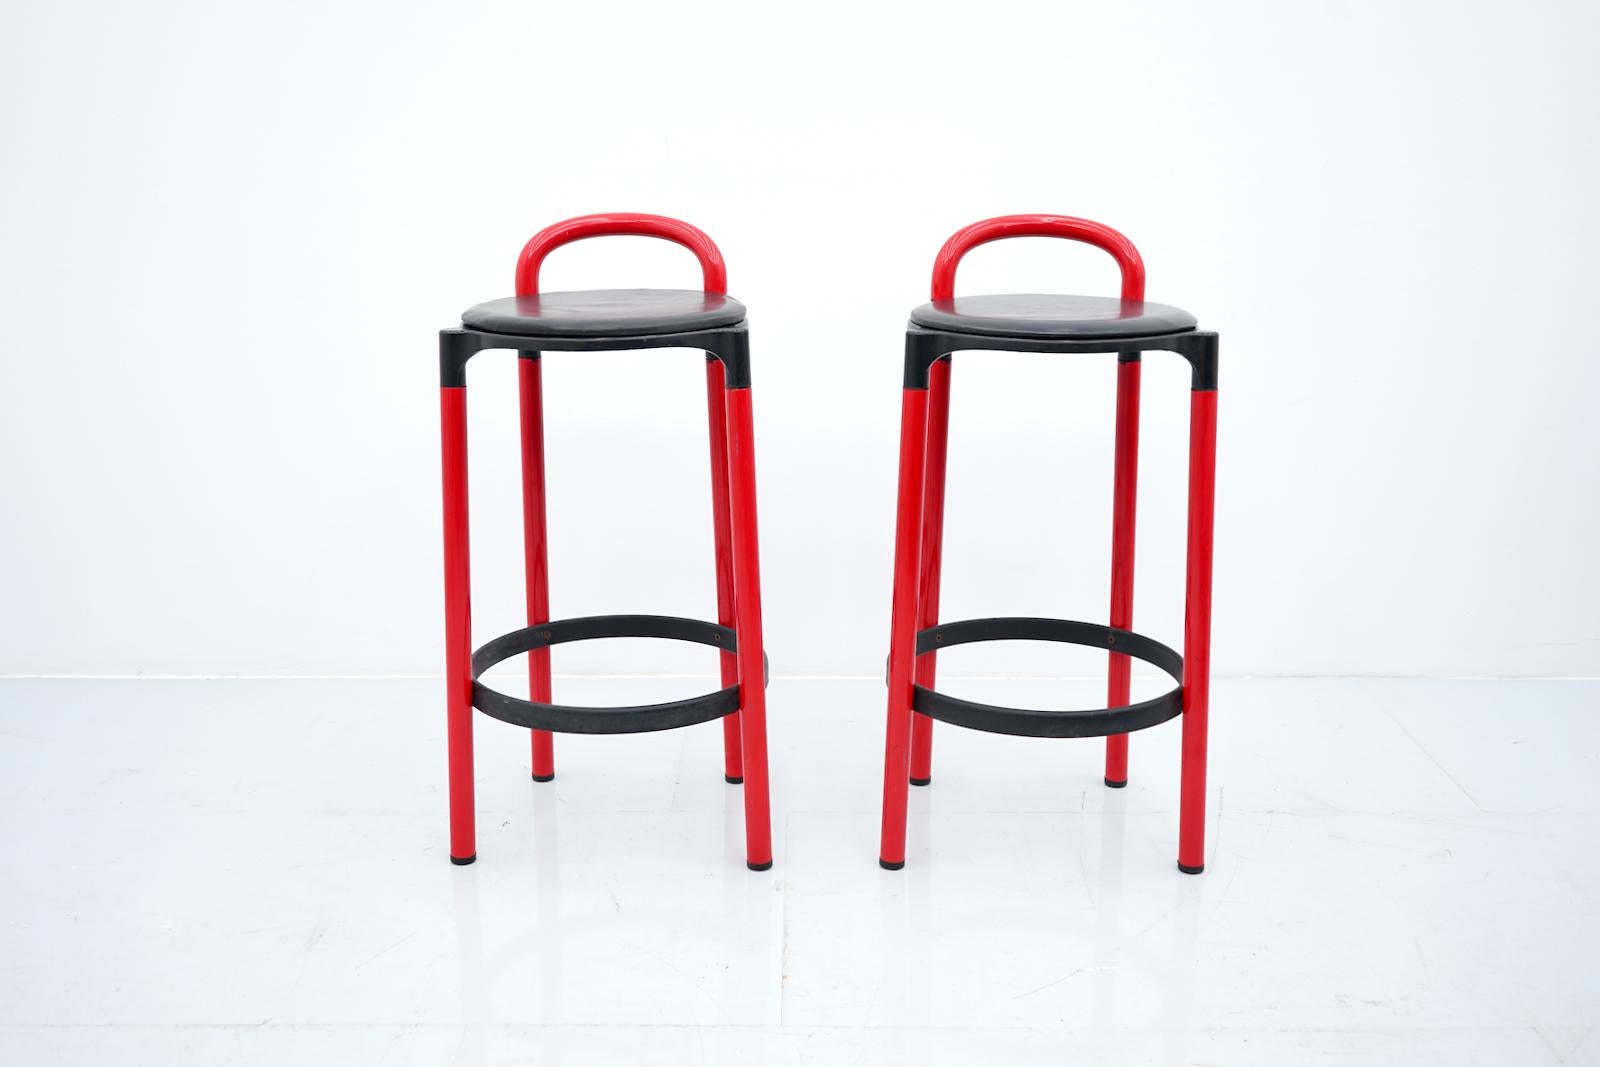 A Pair of high stools mod. 4823 by Anna Castelli for Kartell, 1979 in red and black with the original black cushion.

Good condition with small signs of usage.